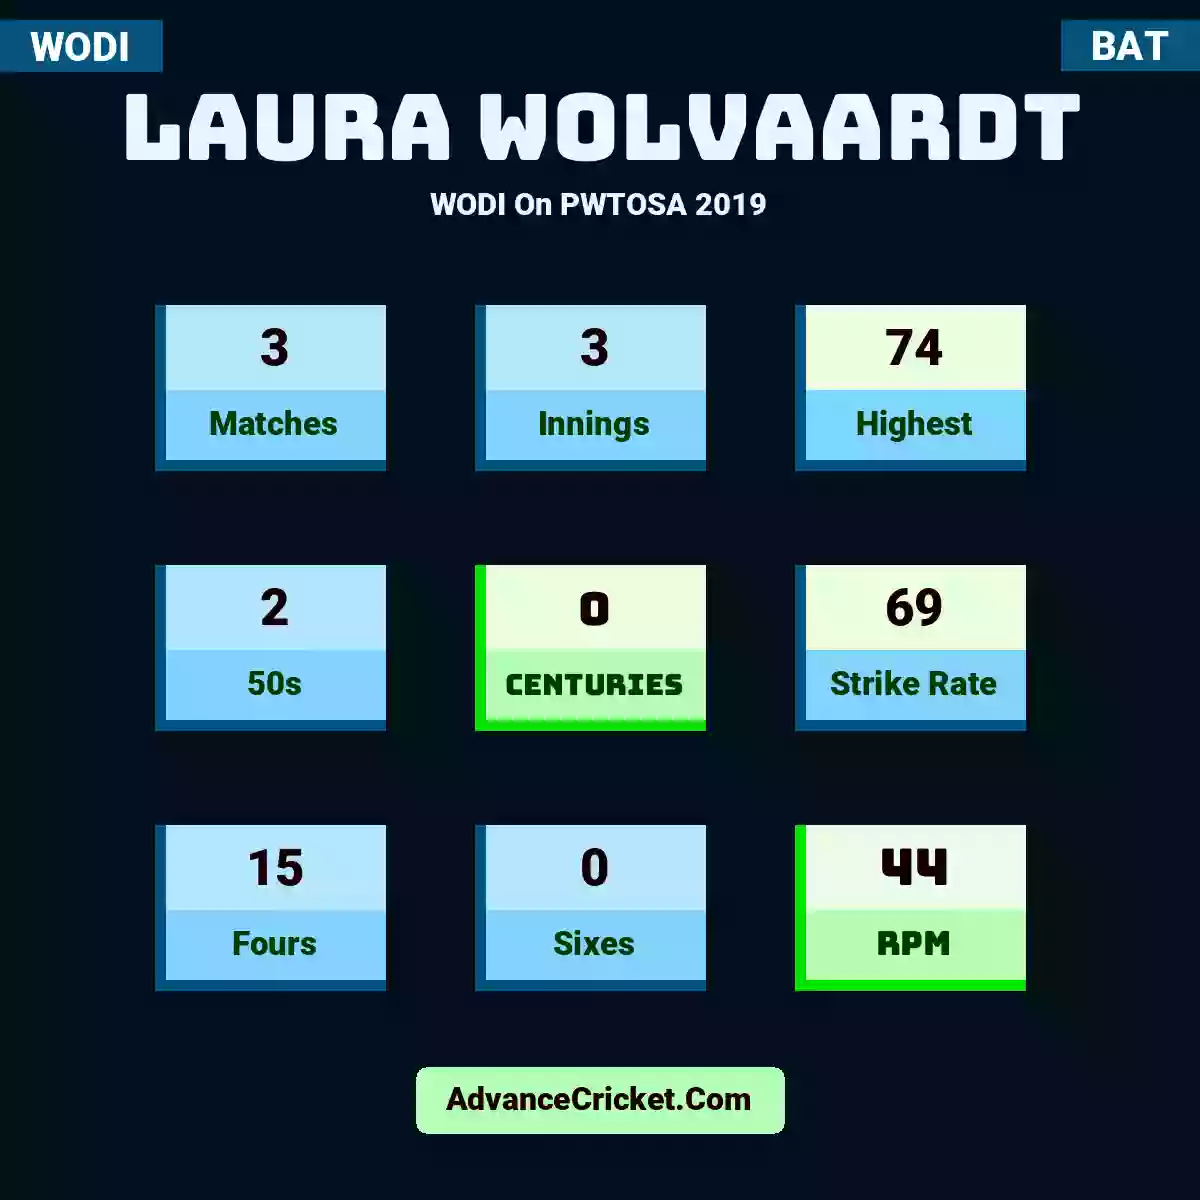 Laura Wolvaardt WODI  On PWTOSA 2019, Laura Wolvaardt played 3 matches, scored 74 runs as highest, 2 half-centuries, and 0 centuries, with a strike rate of 69. L.Wolvaardt hit 15 fours and 0 sixes, with an RPM of 44.